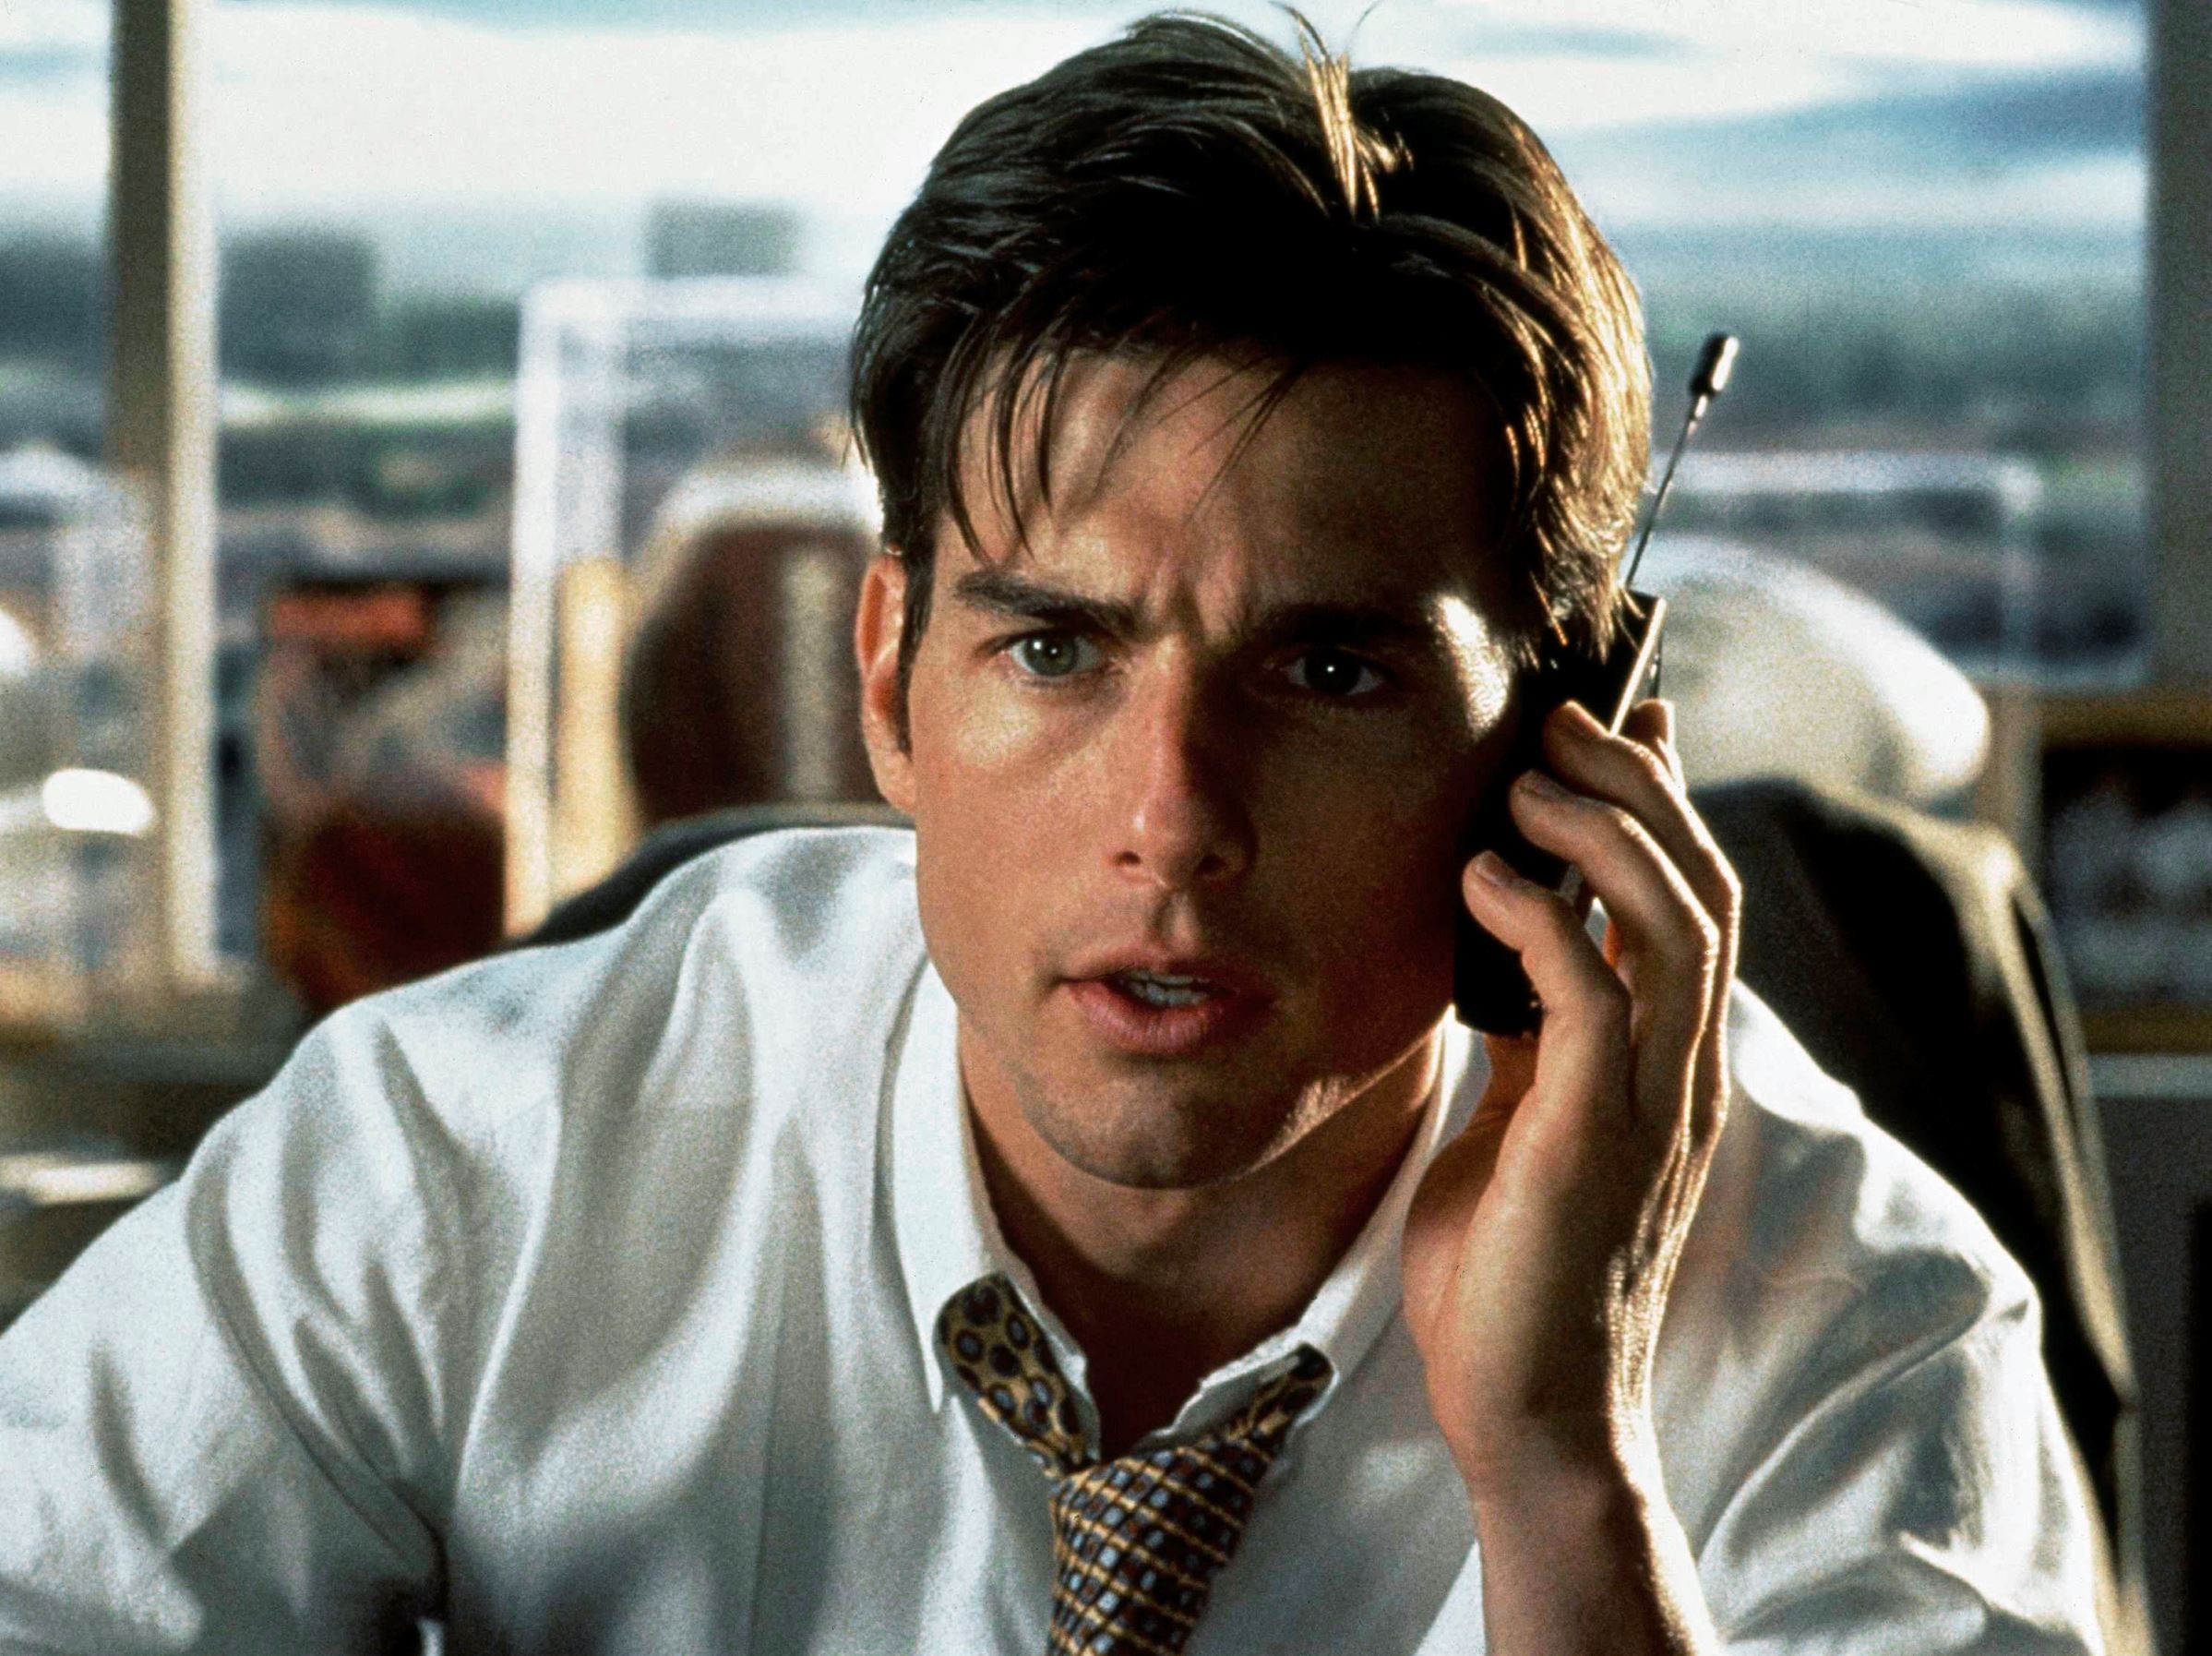 Jerry Maguire: Gerald, Tom Cruise, One of the richest actors. 2400x1800 HD Wallpaper.